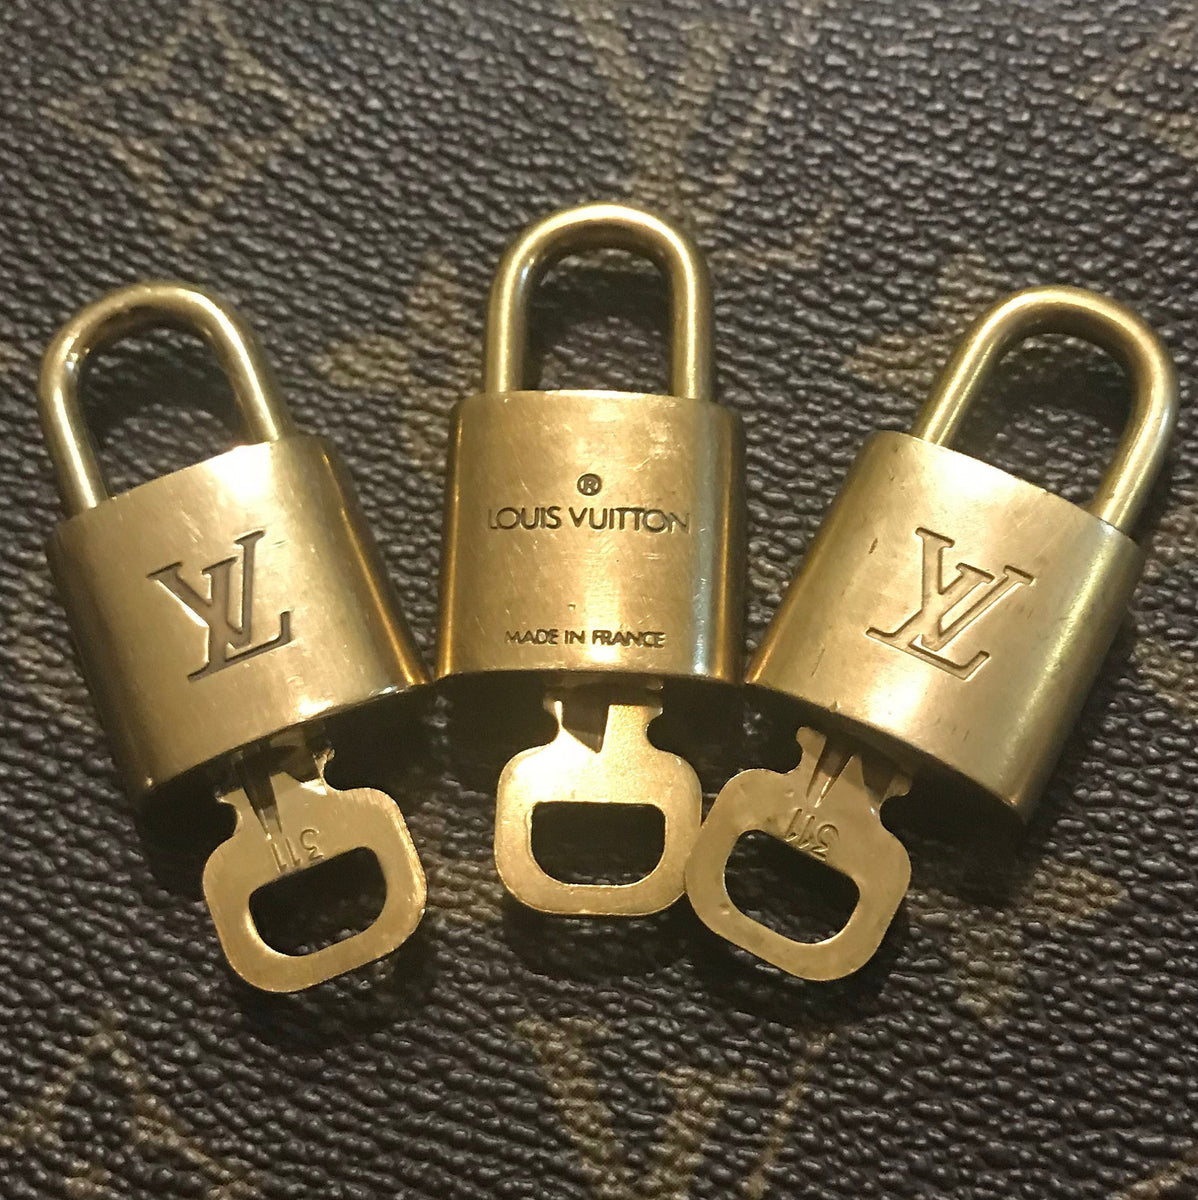 LOUIS VUITTON AUTH LOCK KEY PADLOCK- POLISHED! Comes In LV GIFT DRAWER BOX